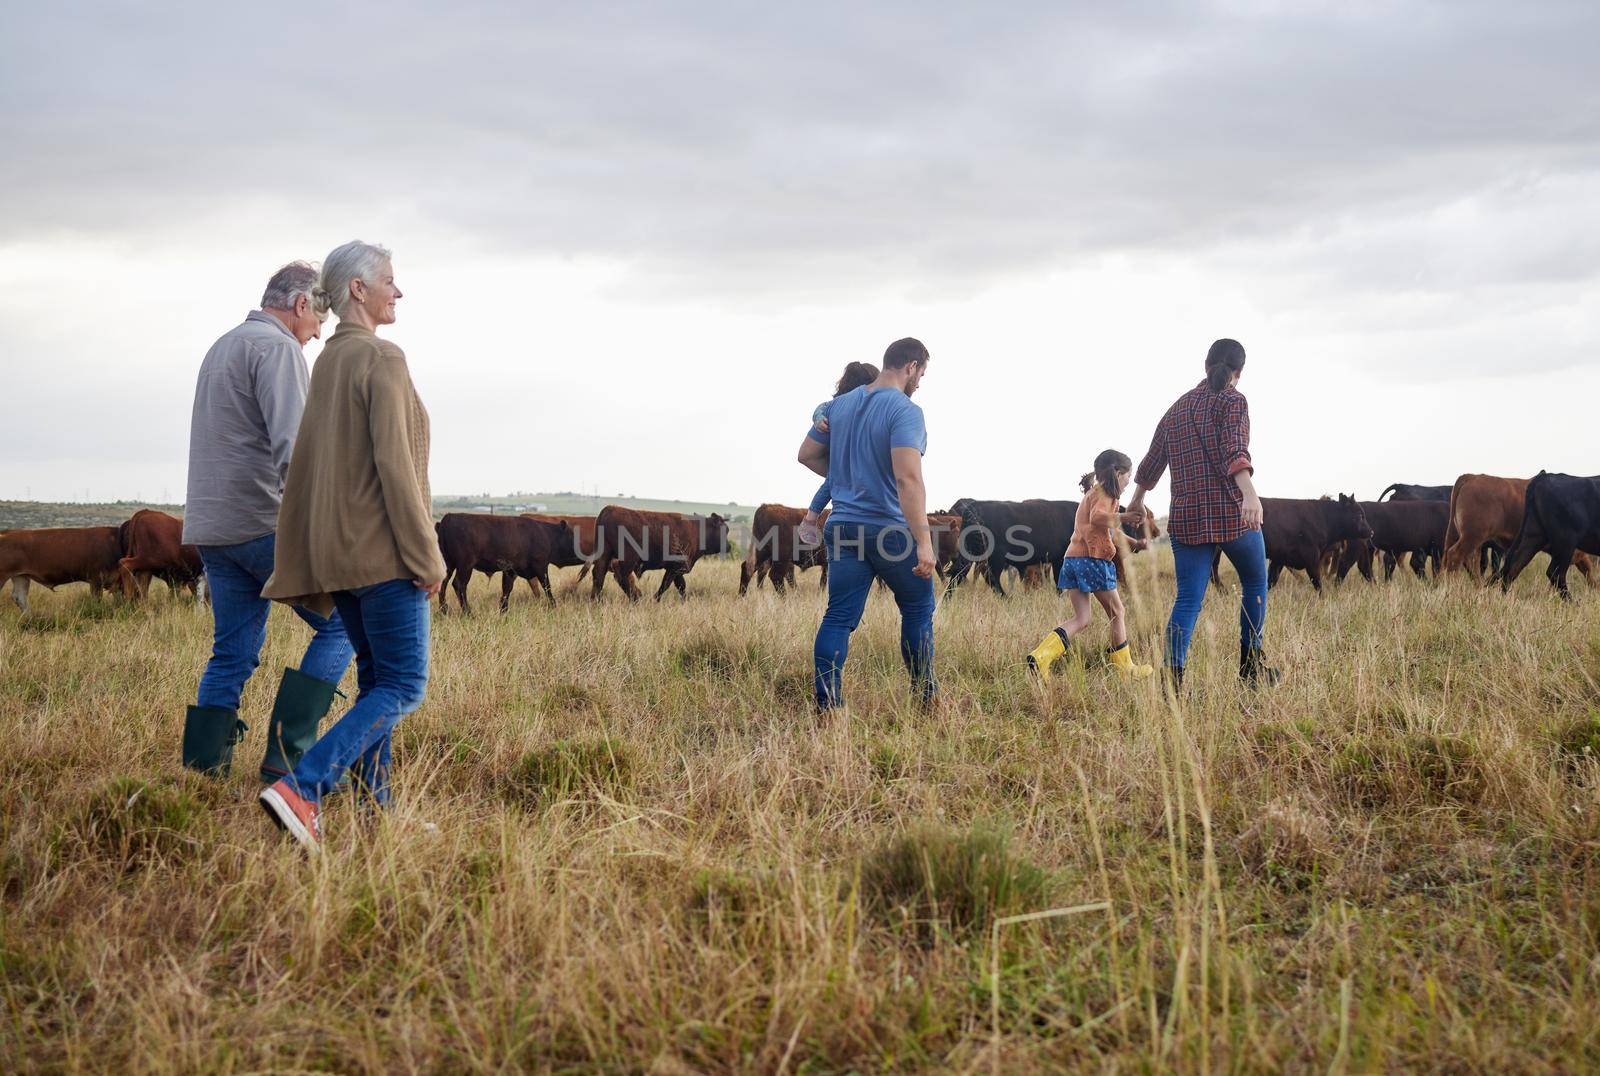 Family together, cattle field and business with people you love. Countryside farmer parents walking in meadow with children to bond. Relationship with kids and sharing ranch for next generation